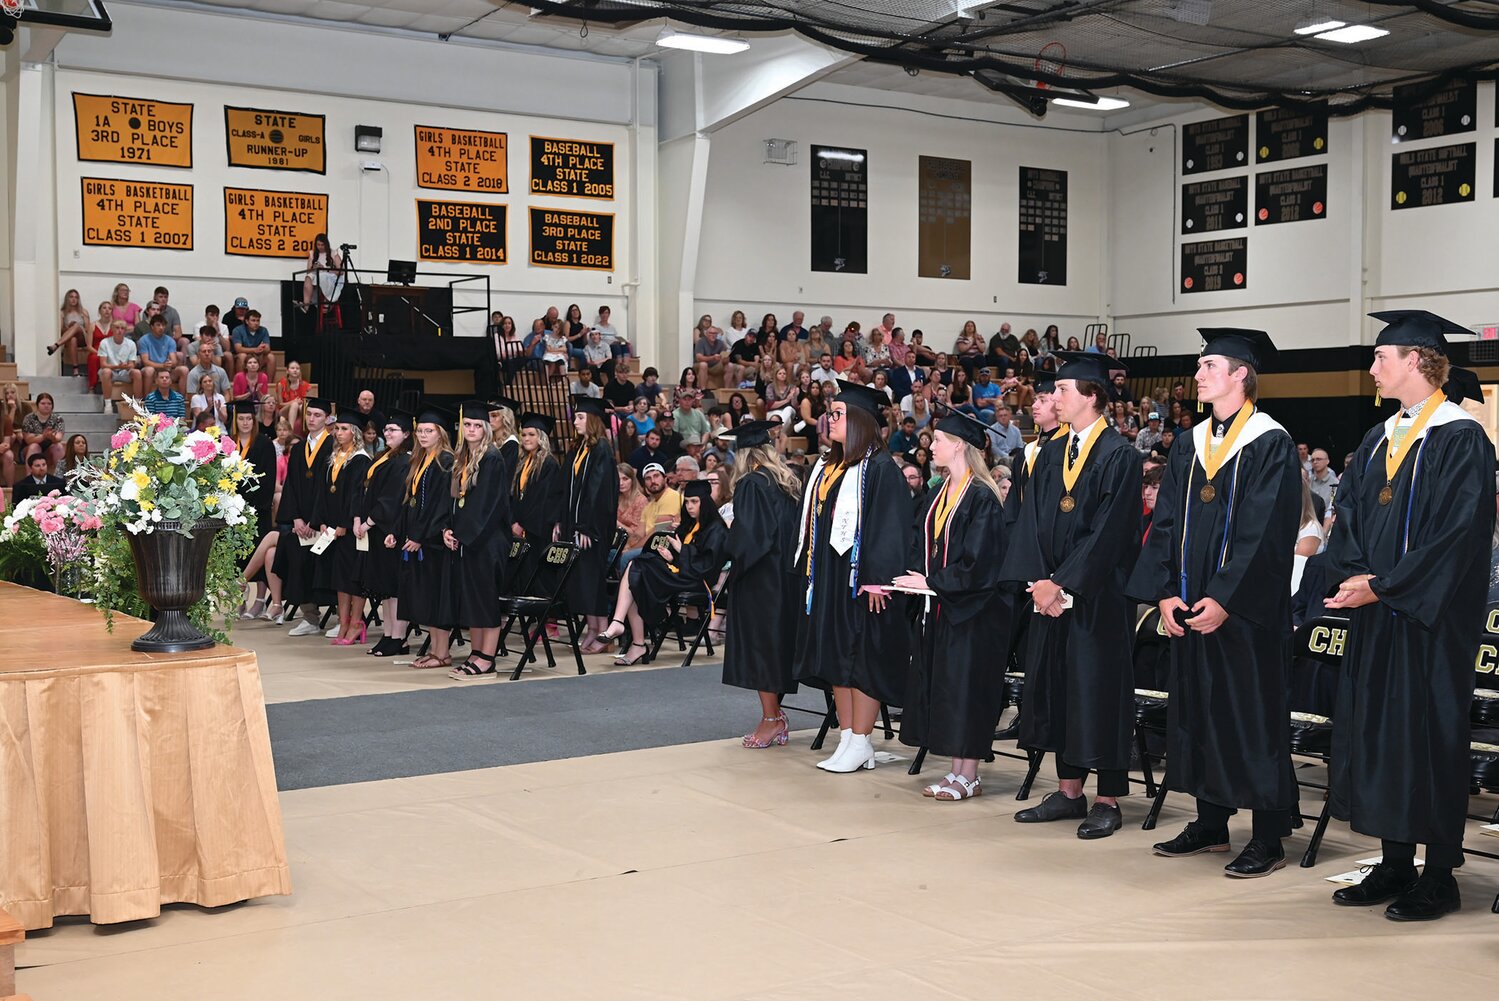 Seniors at Cairo High School stand during the commencement ceremony held on May 14.